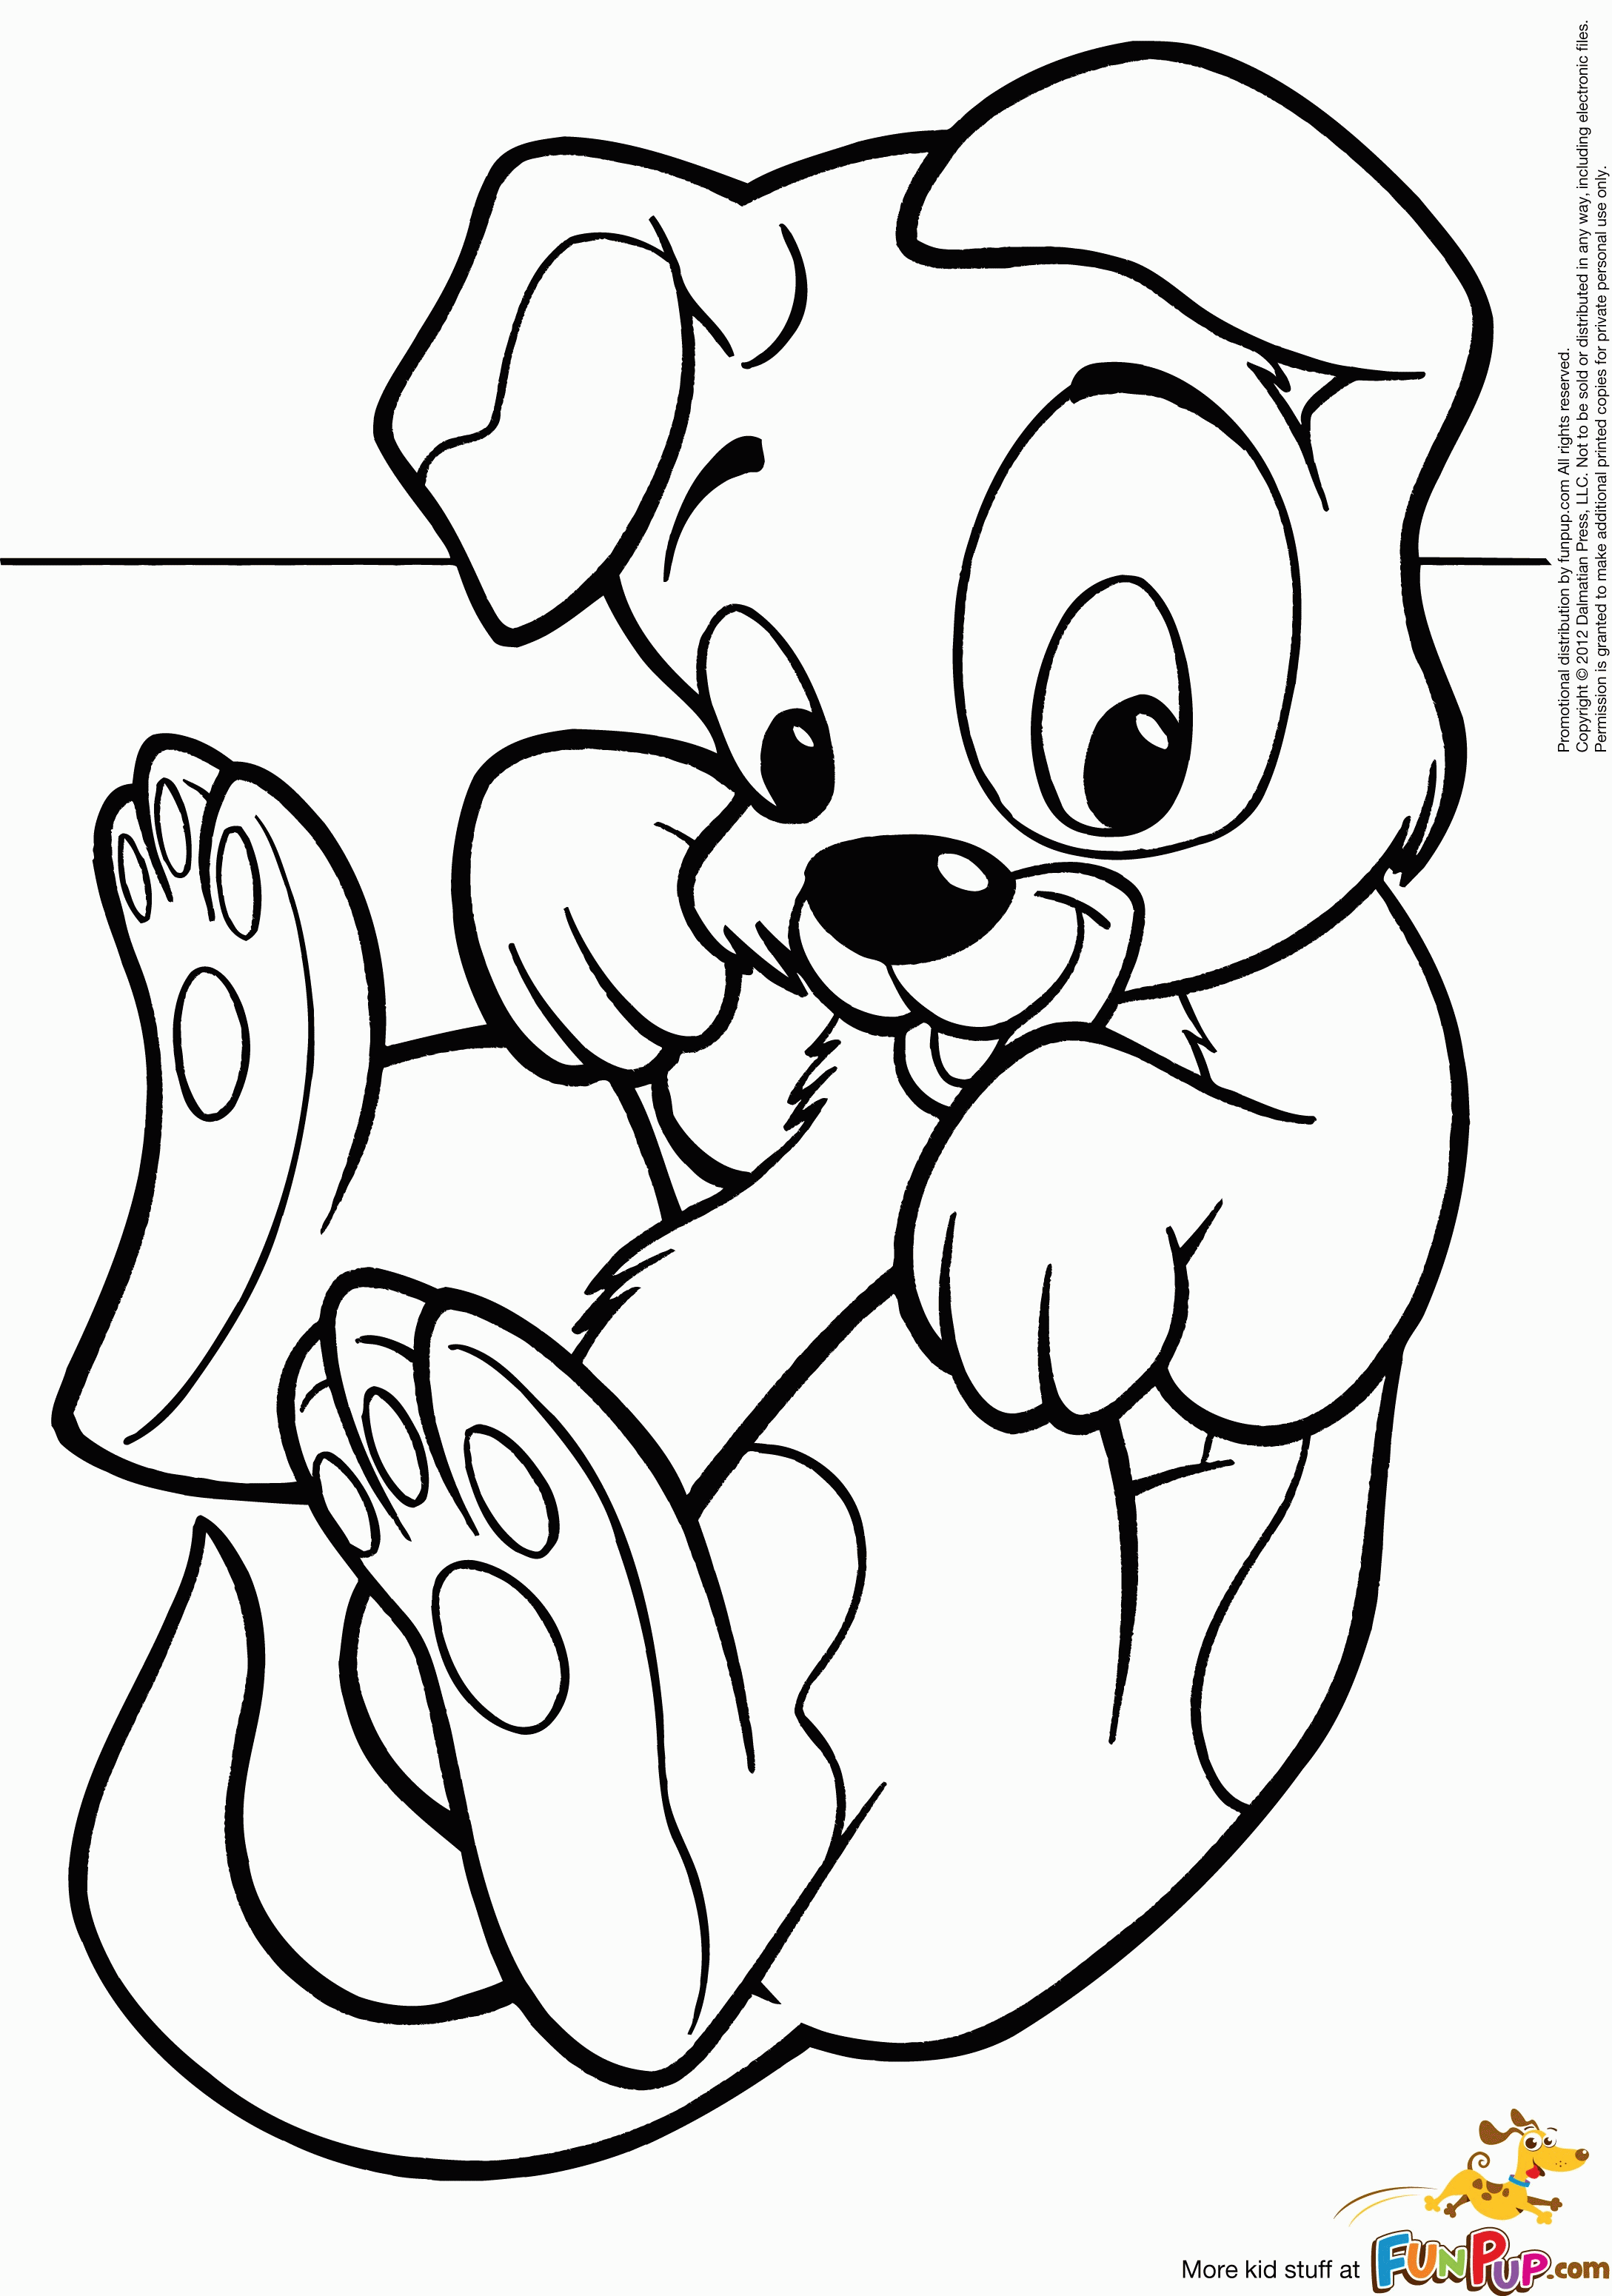 Kitten And Puppy Coloring Pages To Print Coloring Home